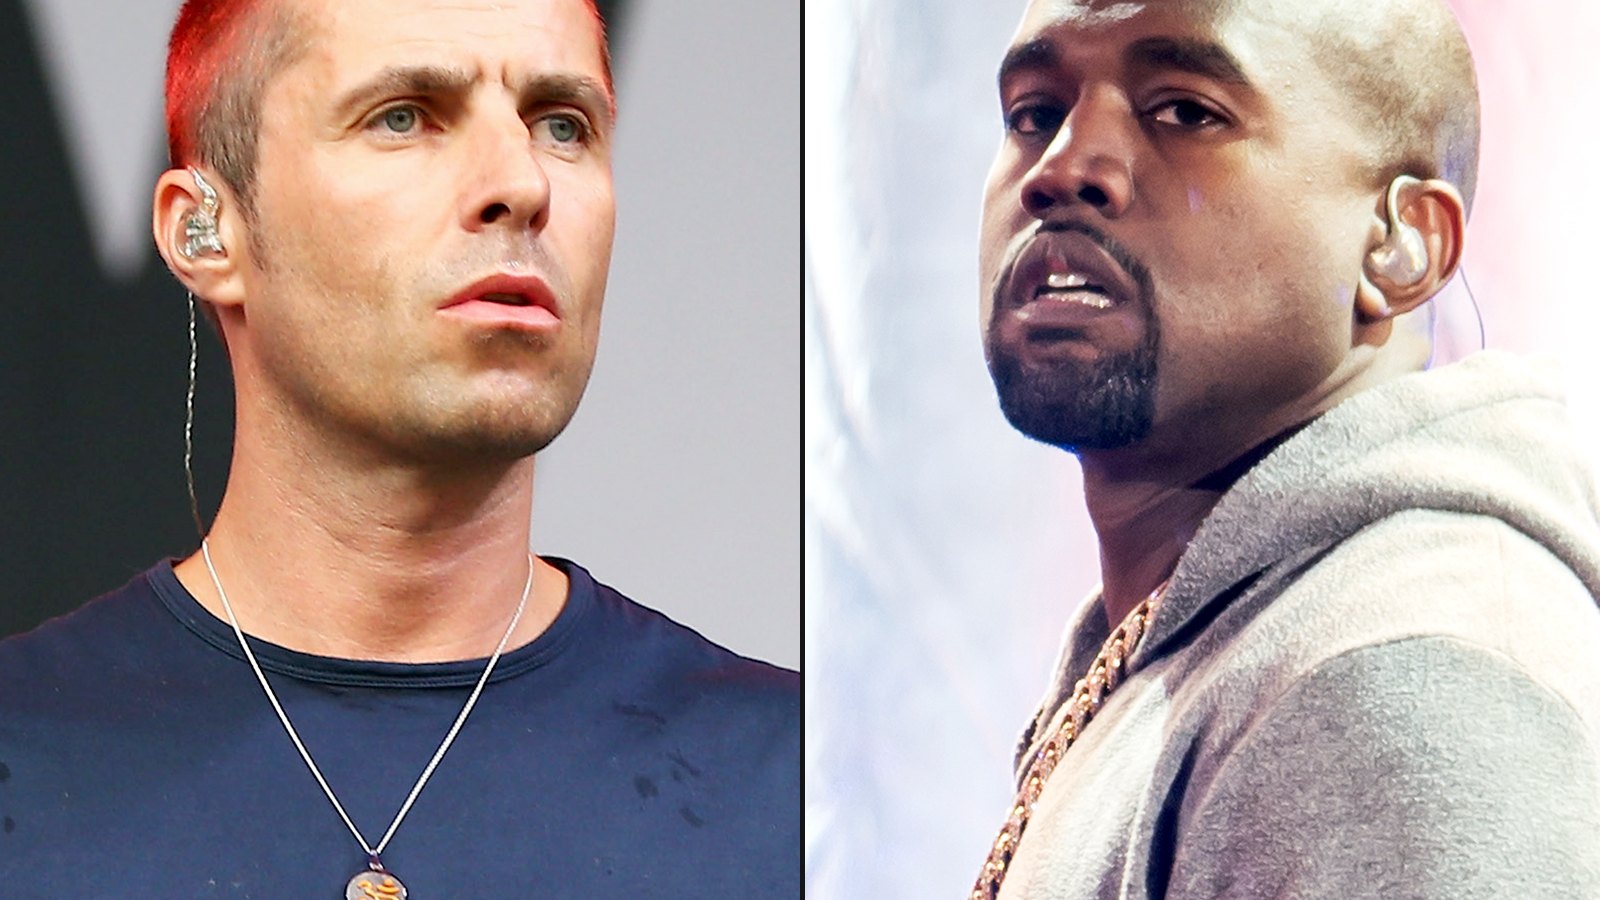 Liam Gallagher and Kanye West